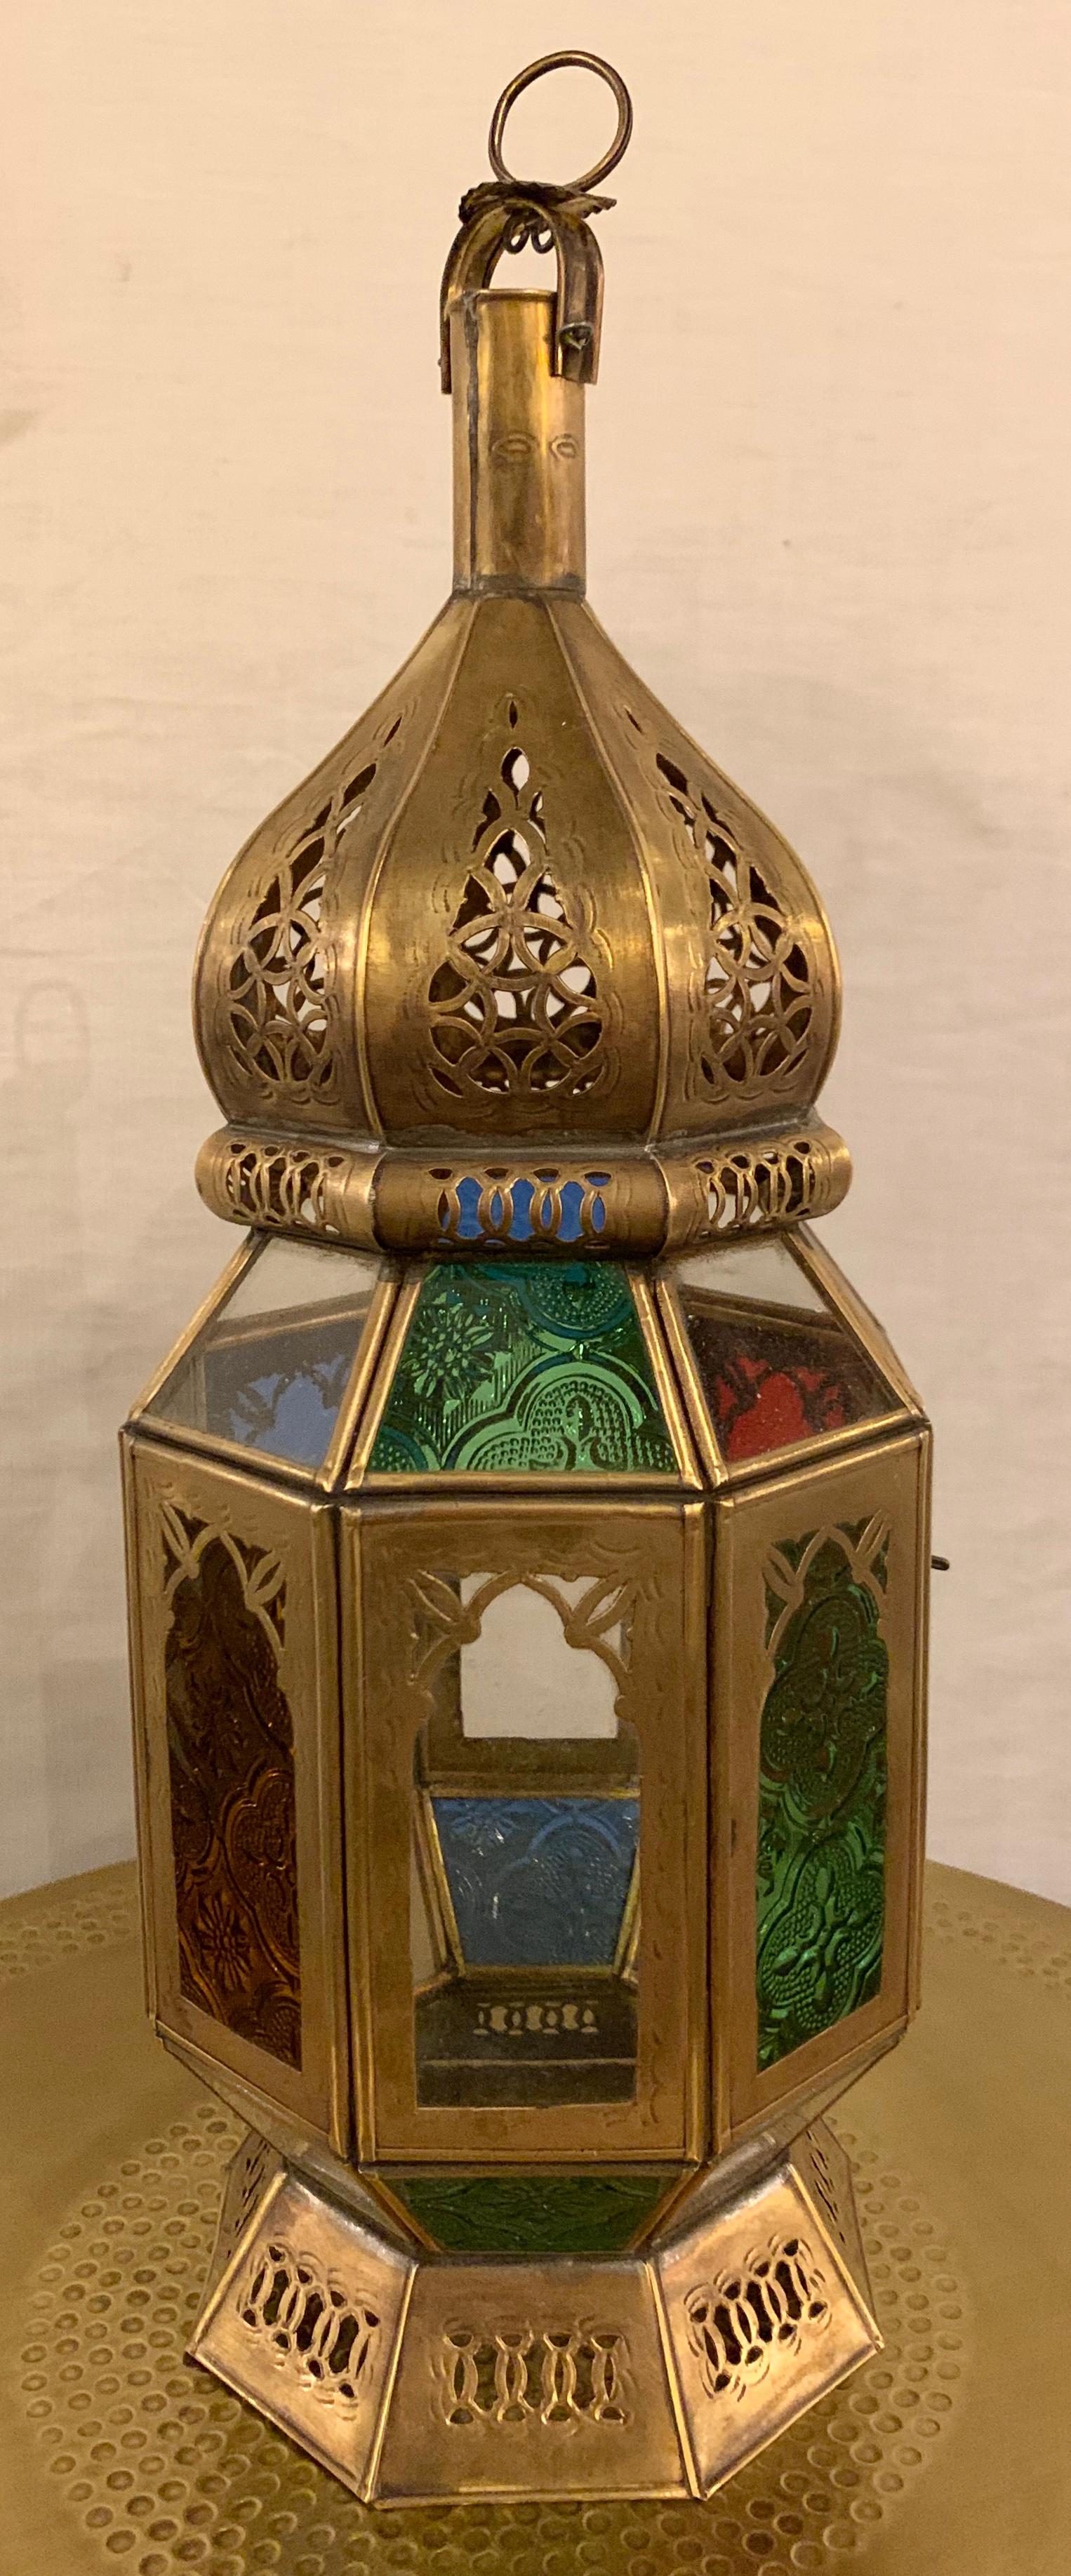 Moroccan lanterns in brass with multicolored glass, a pair

An elegant pair of handmade gold brass table or hanging lanterns, candle or tea light holder. Beautifully carved in a Moorish style and decorated with multi-color glass in red, green and